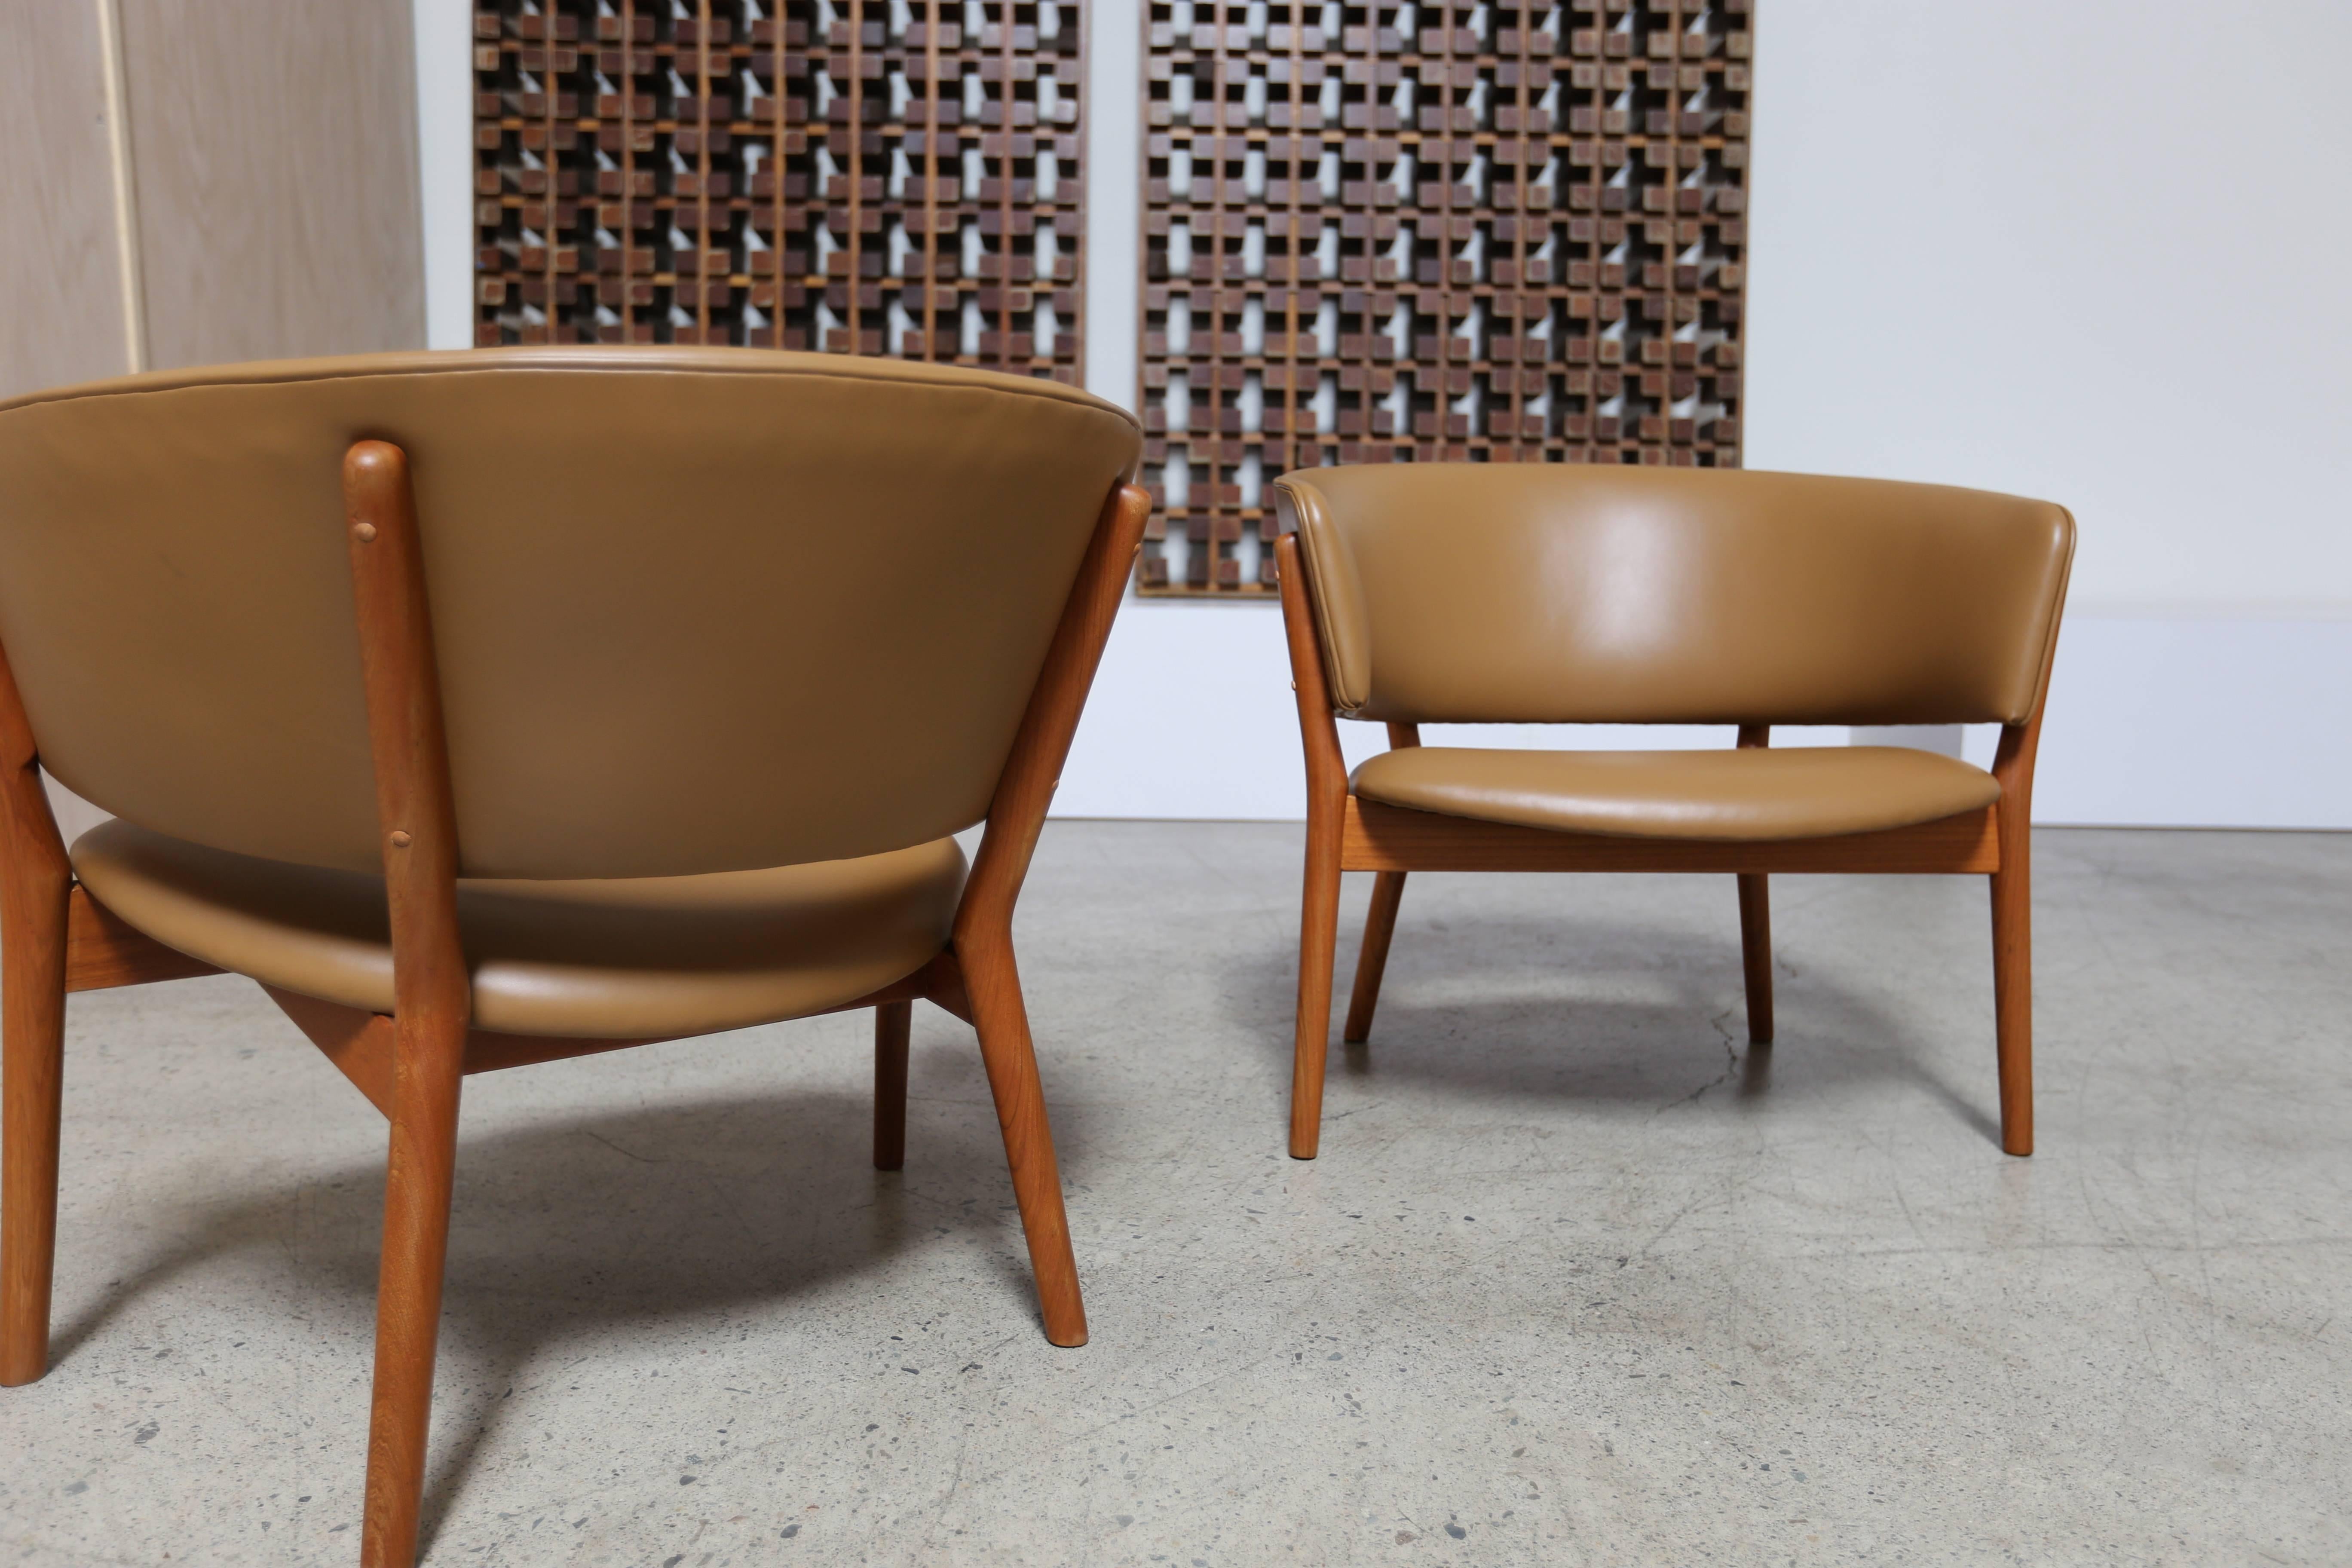 Pair of Leather and Teak Lounge Chairs by Nanna & Jorgen Ditzel 1